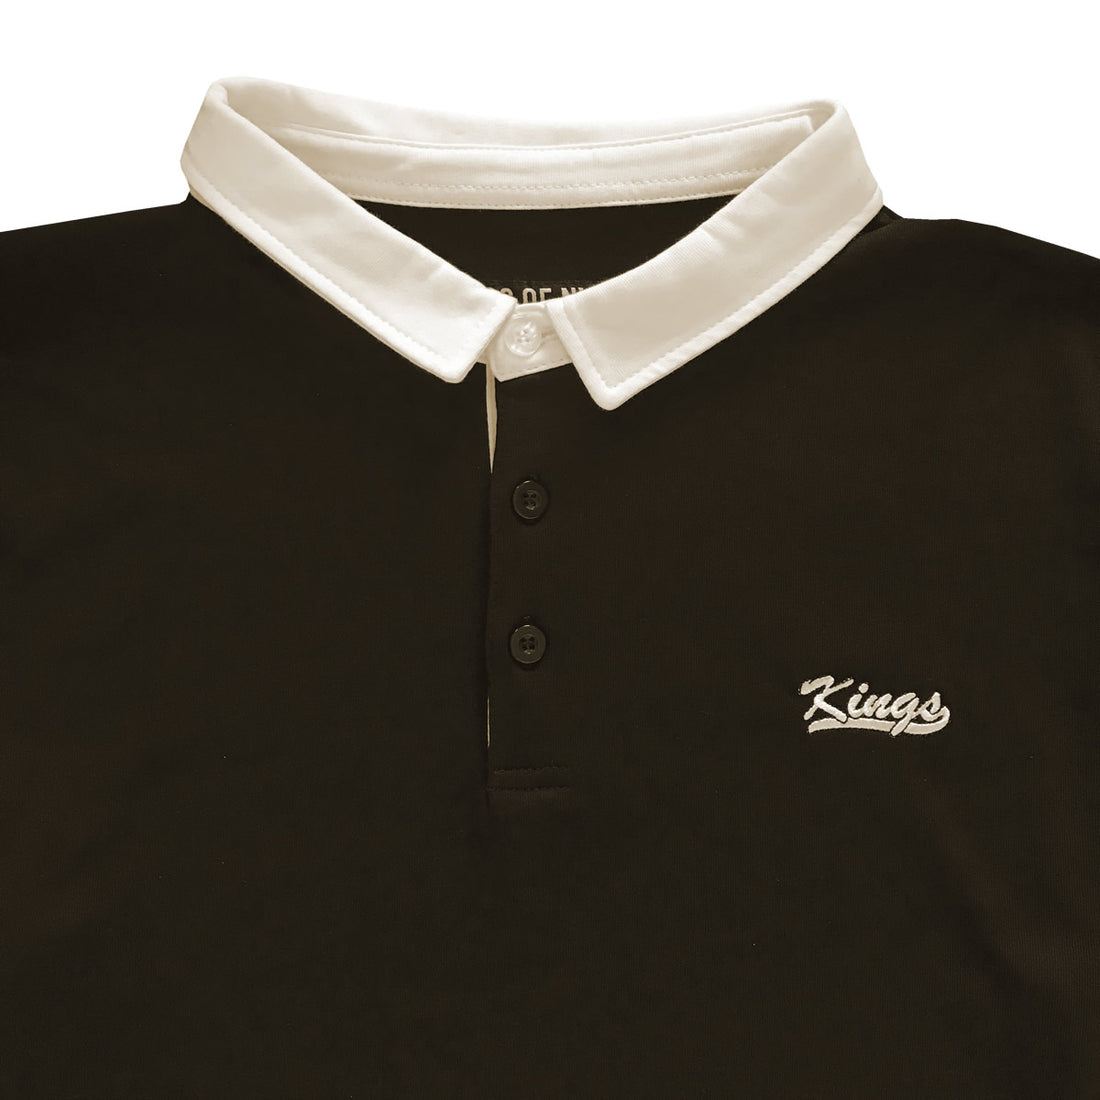 Embroidered Brown Rugby Shirt Just ADDED!